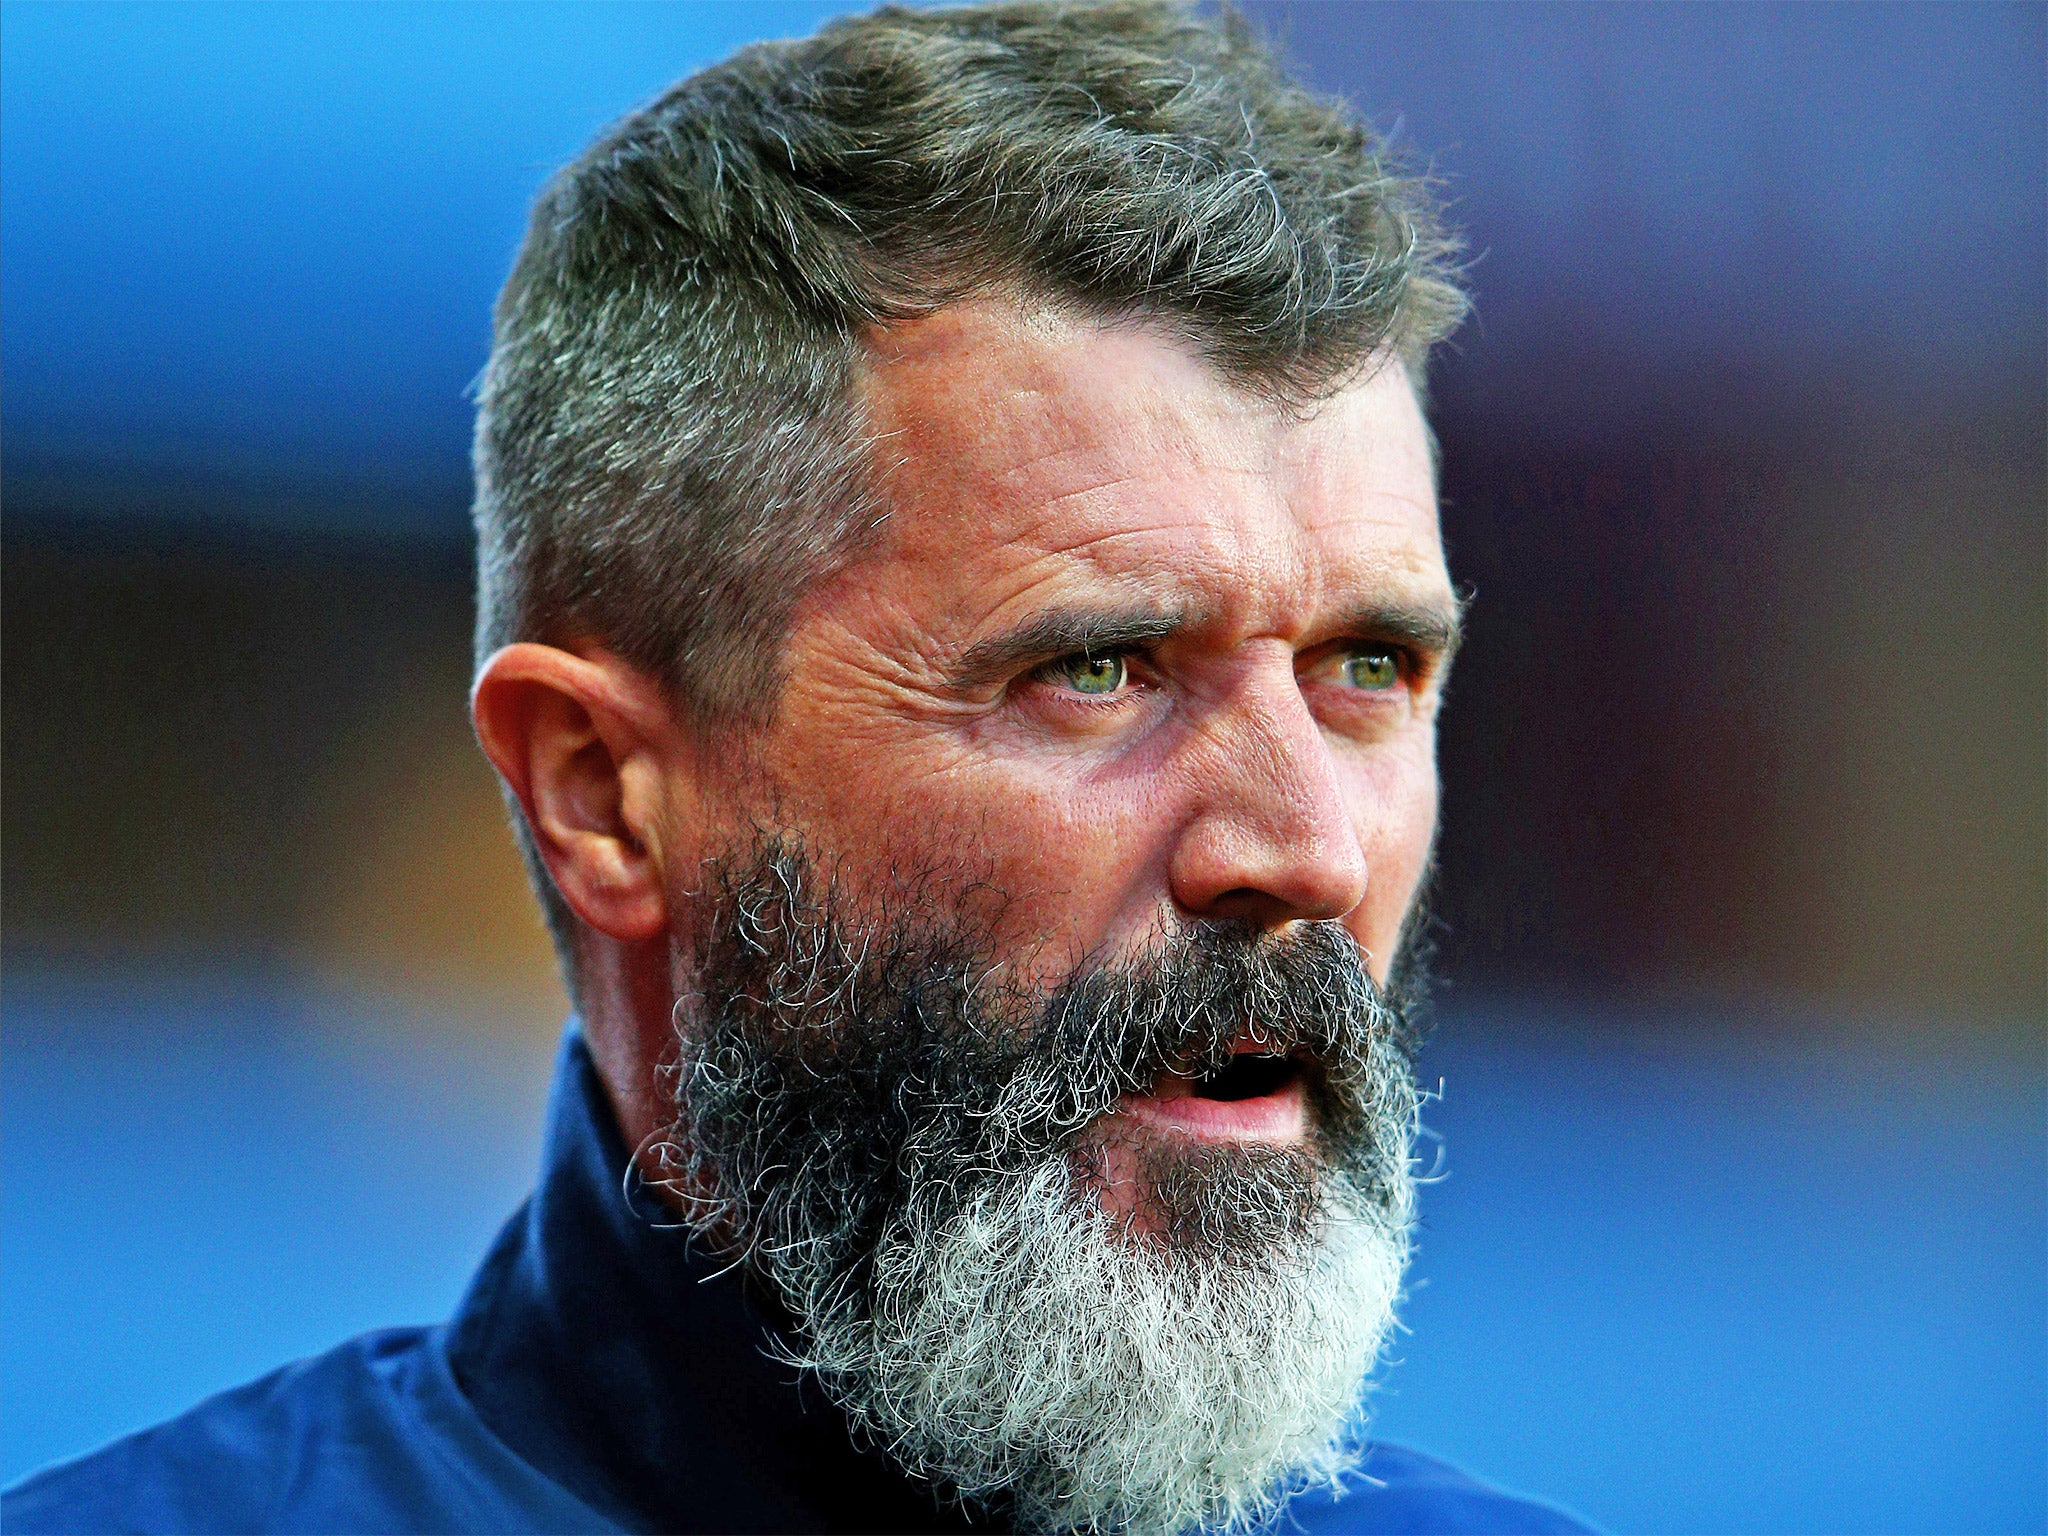 Roy Keane was ‘demanding on the pitch but off it he was a nice guy’ says Wayne Rooney